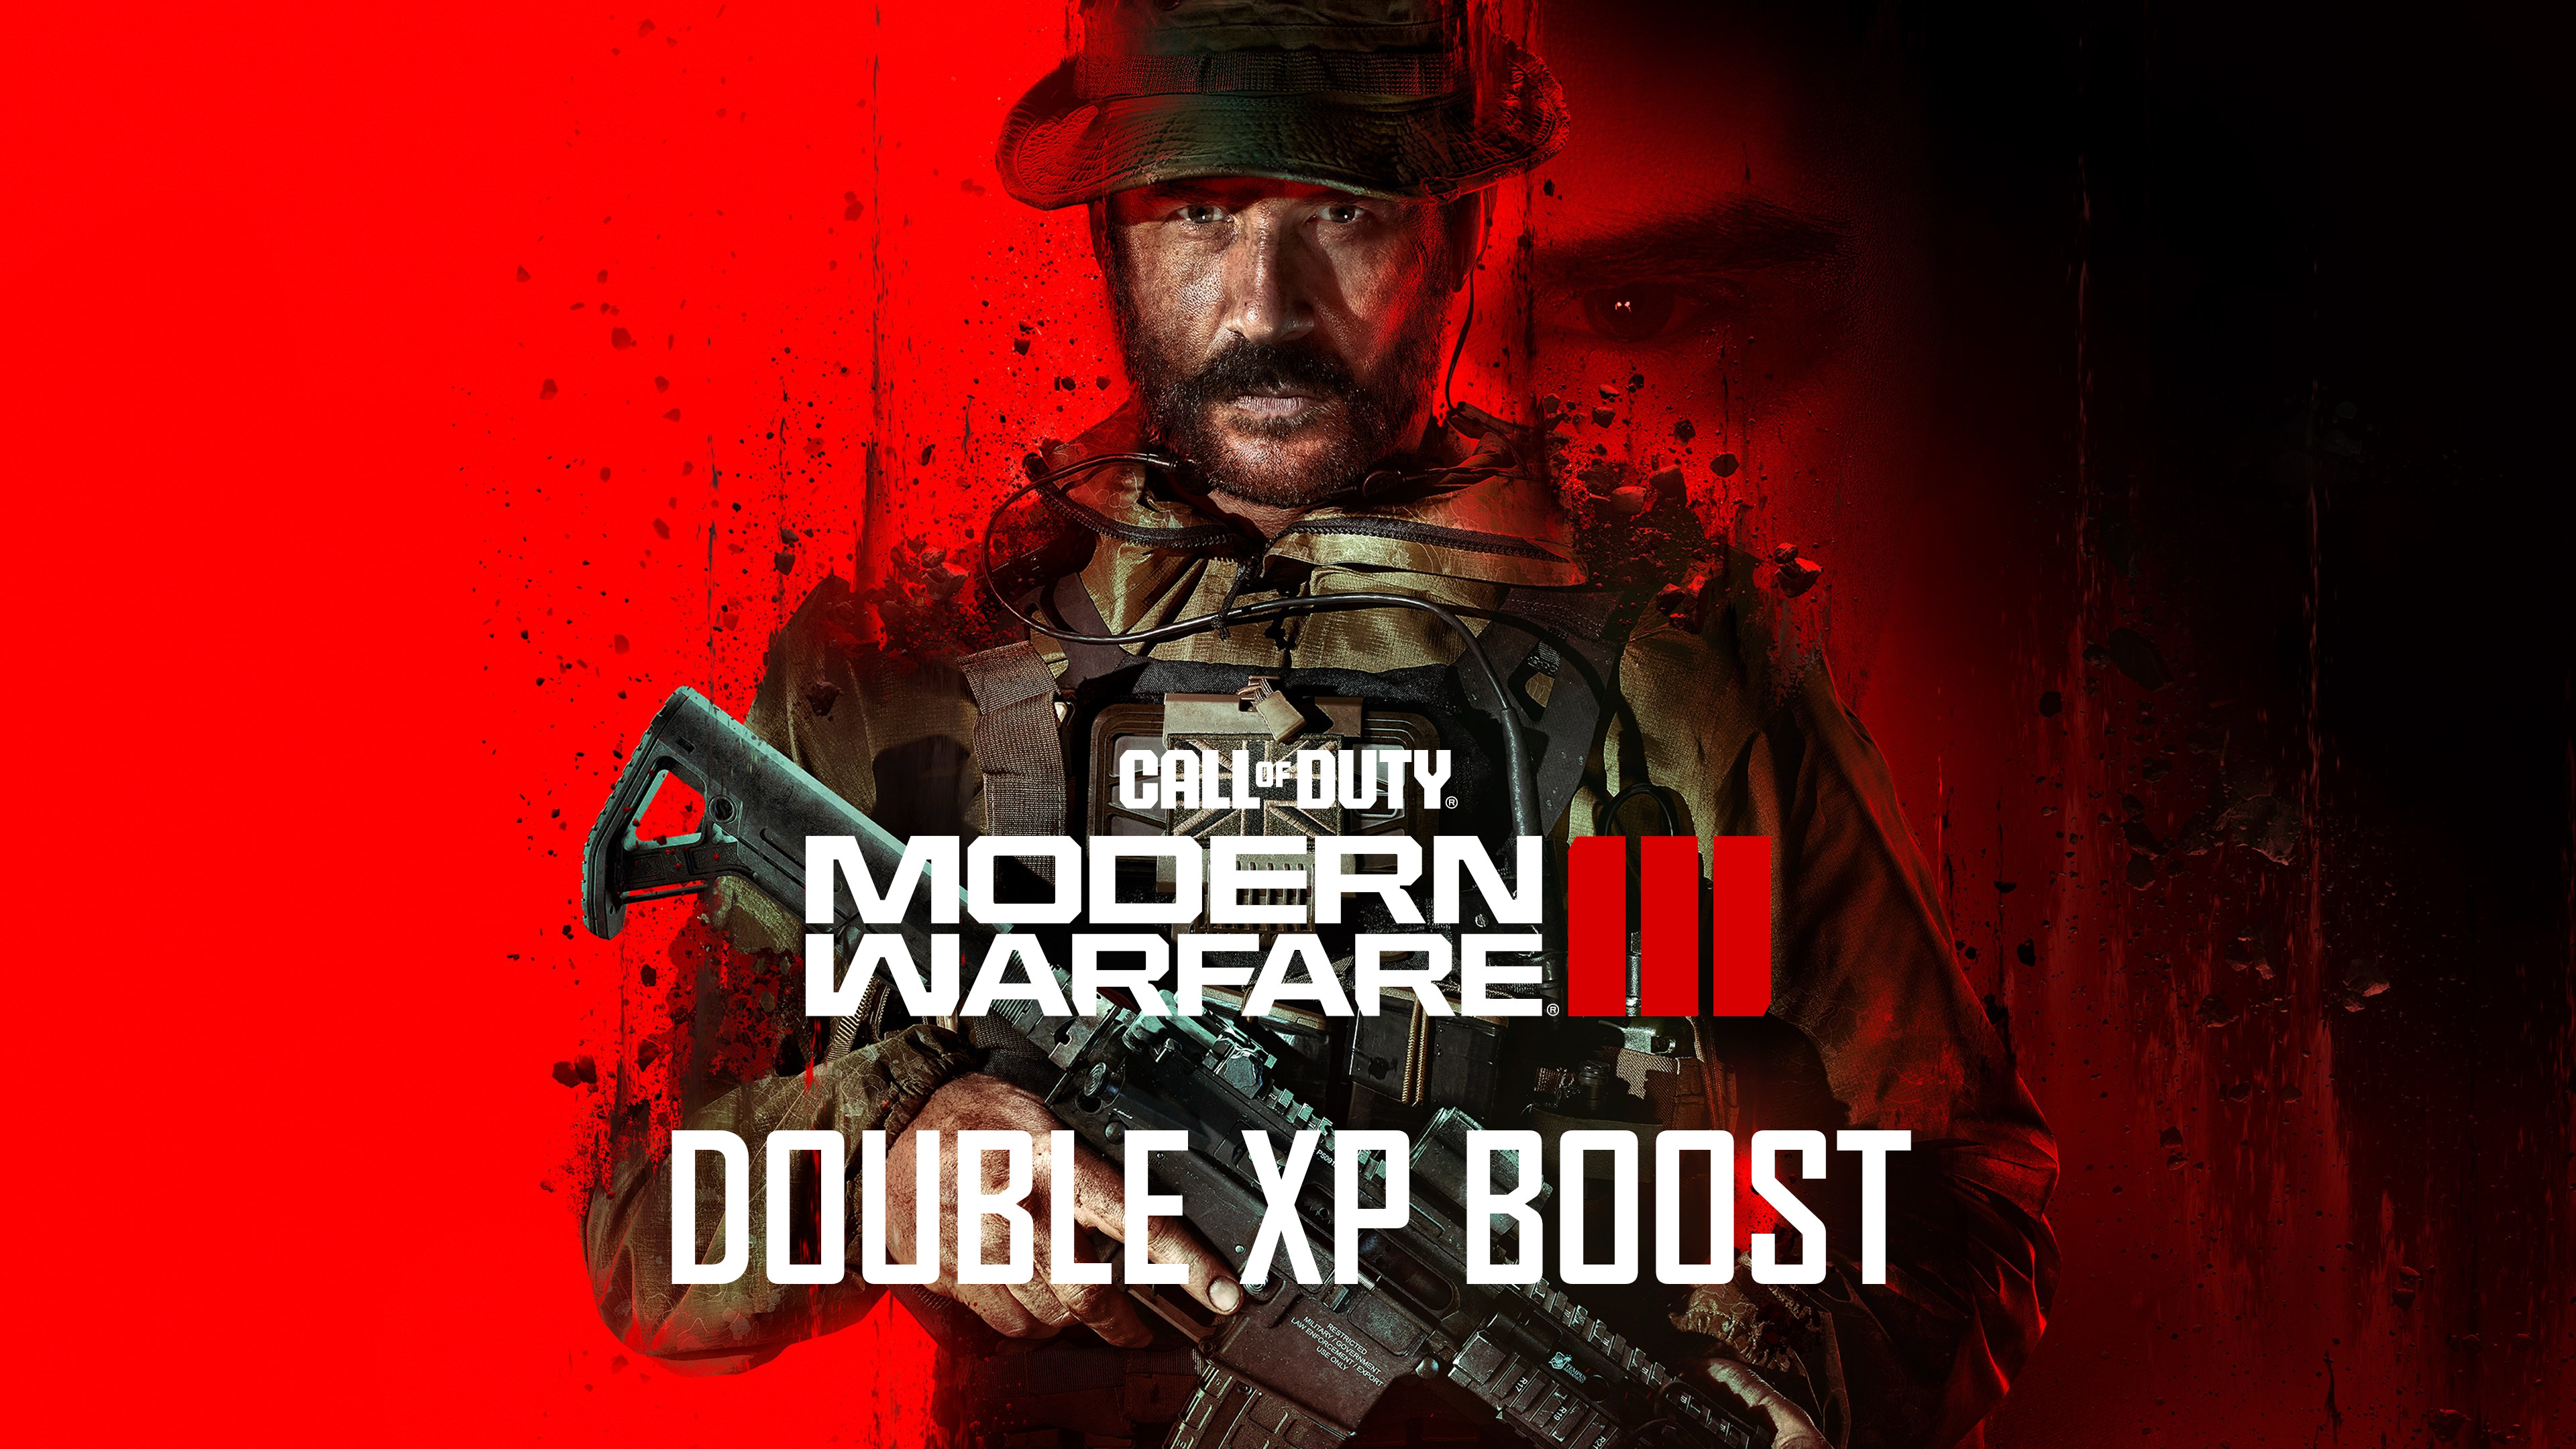 Call of Duty: Modern Warfare III - 15 Hours Double XP Boost PC/PS4/PS5/XBOX One/Series X|S CD Key, 14.68 usd